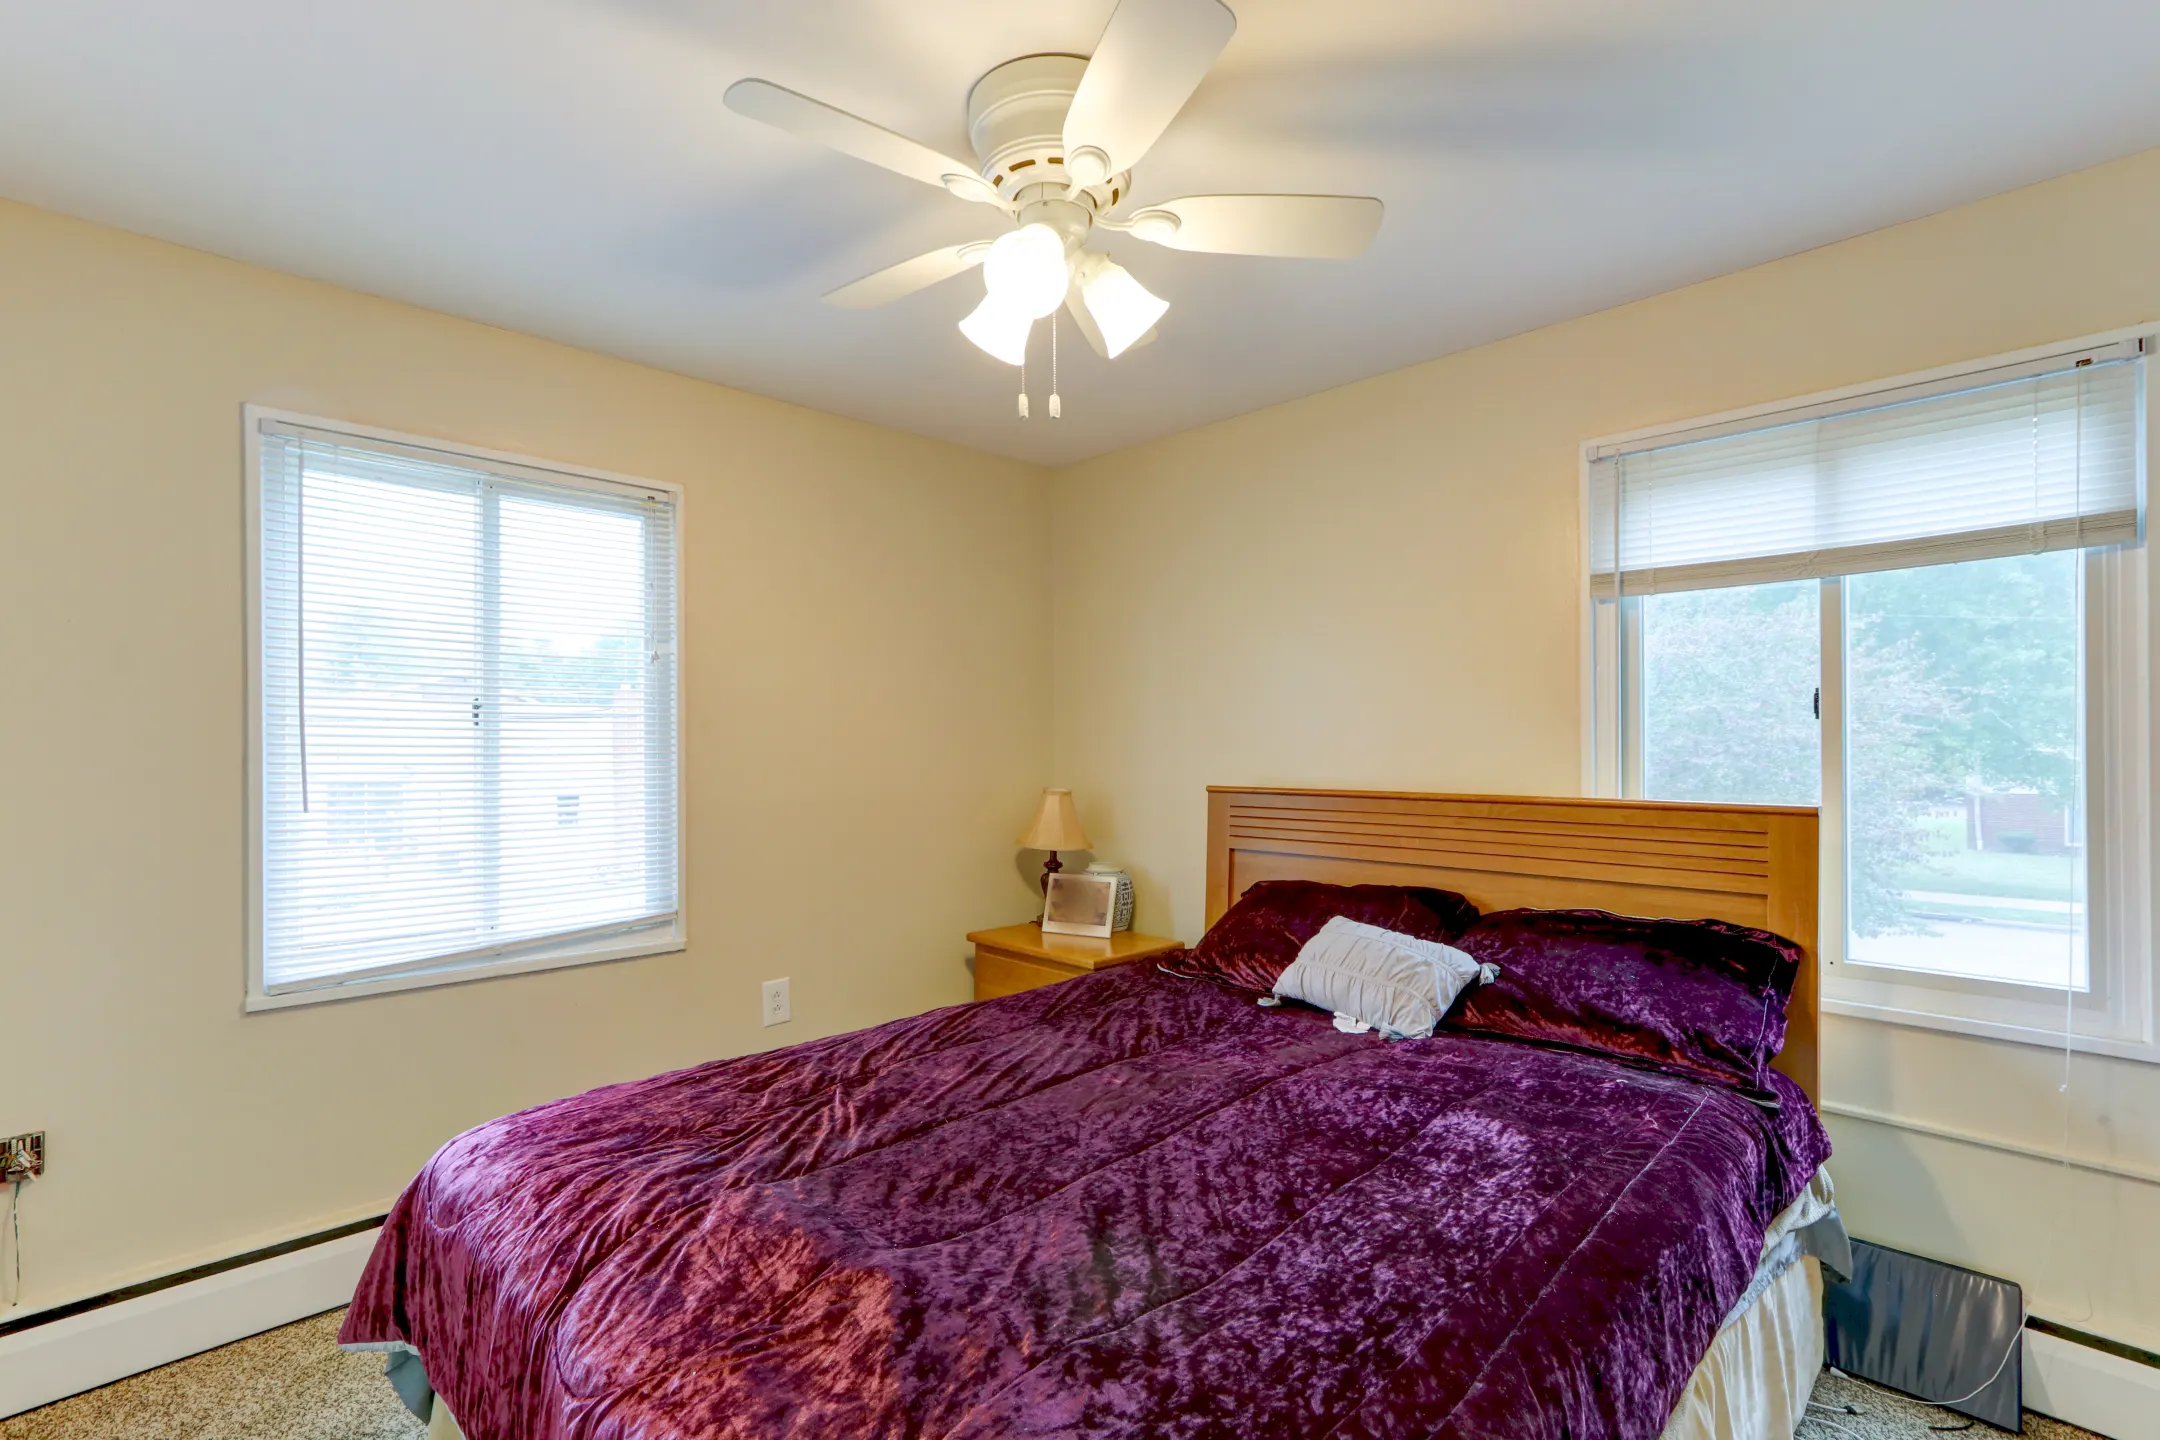 Bedroom - Seneca Oaks Apartments - Youngstown, OH